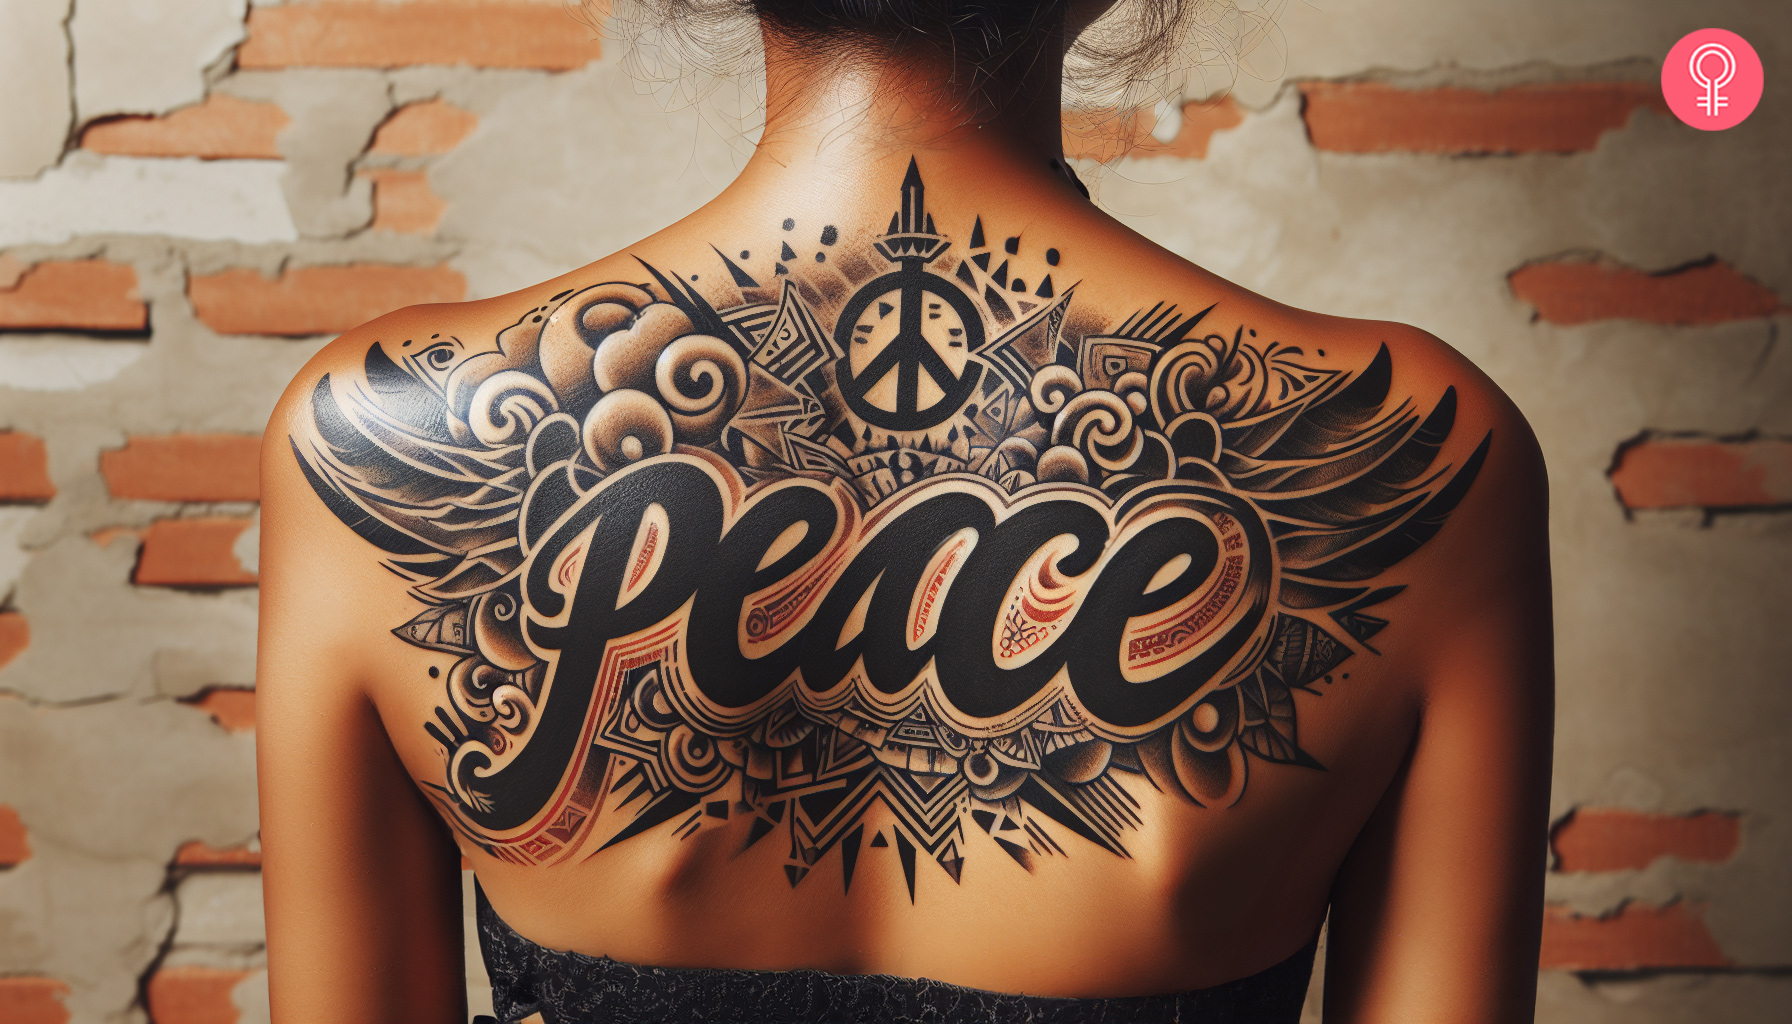 A graffiti tattoo on a woman’s back with the word ‘Peace’